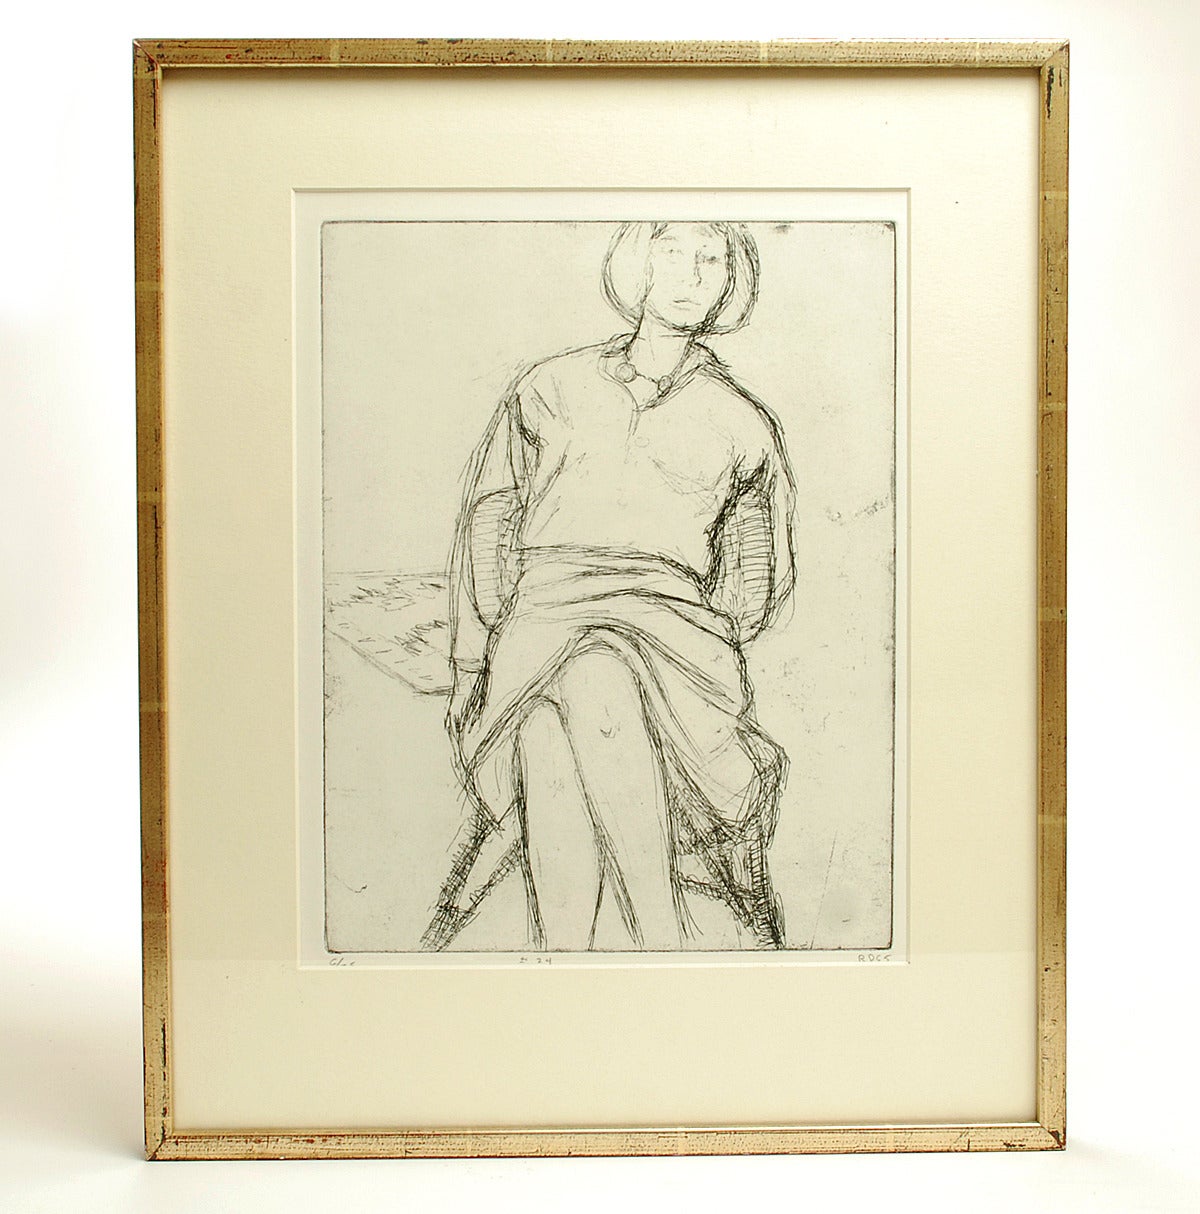 Original Richard Diebenkorn drypoint etching of Phyllis Diebenkorn, initialed 'DR' and dated 1965 in lower right. Lower left: 6/77 followed by #24.

Provenance:

1. Charles Campbell Gallery, Richard Diebenkorn 41 etchings drypoints, wood-block